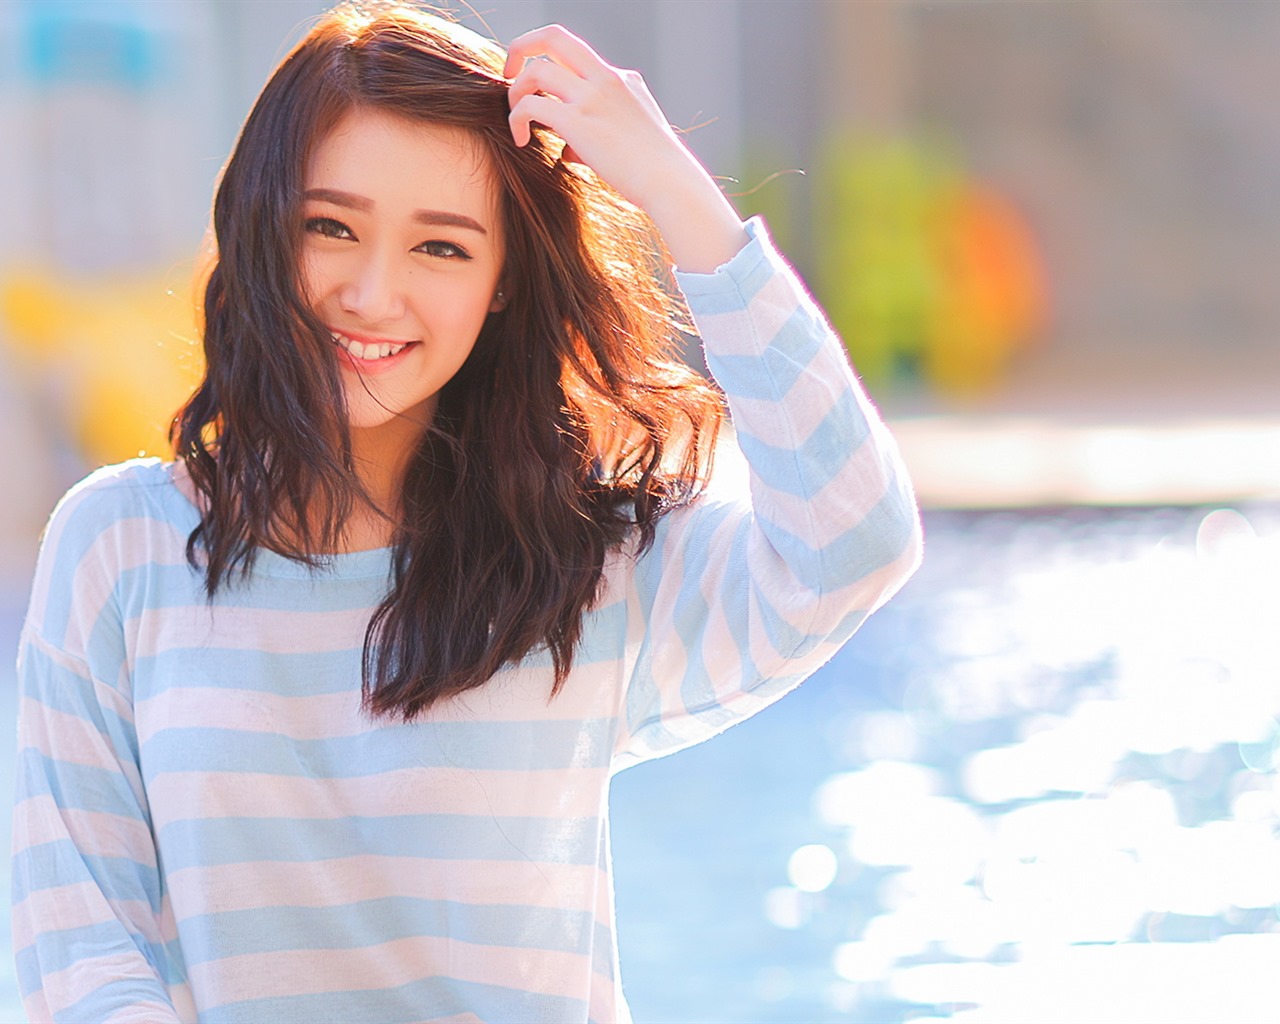 Pure and lovely young Asian girl HD wallpapers collection (1) #22 - 1280x1024